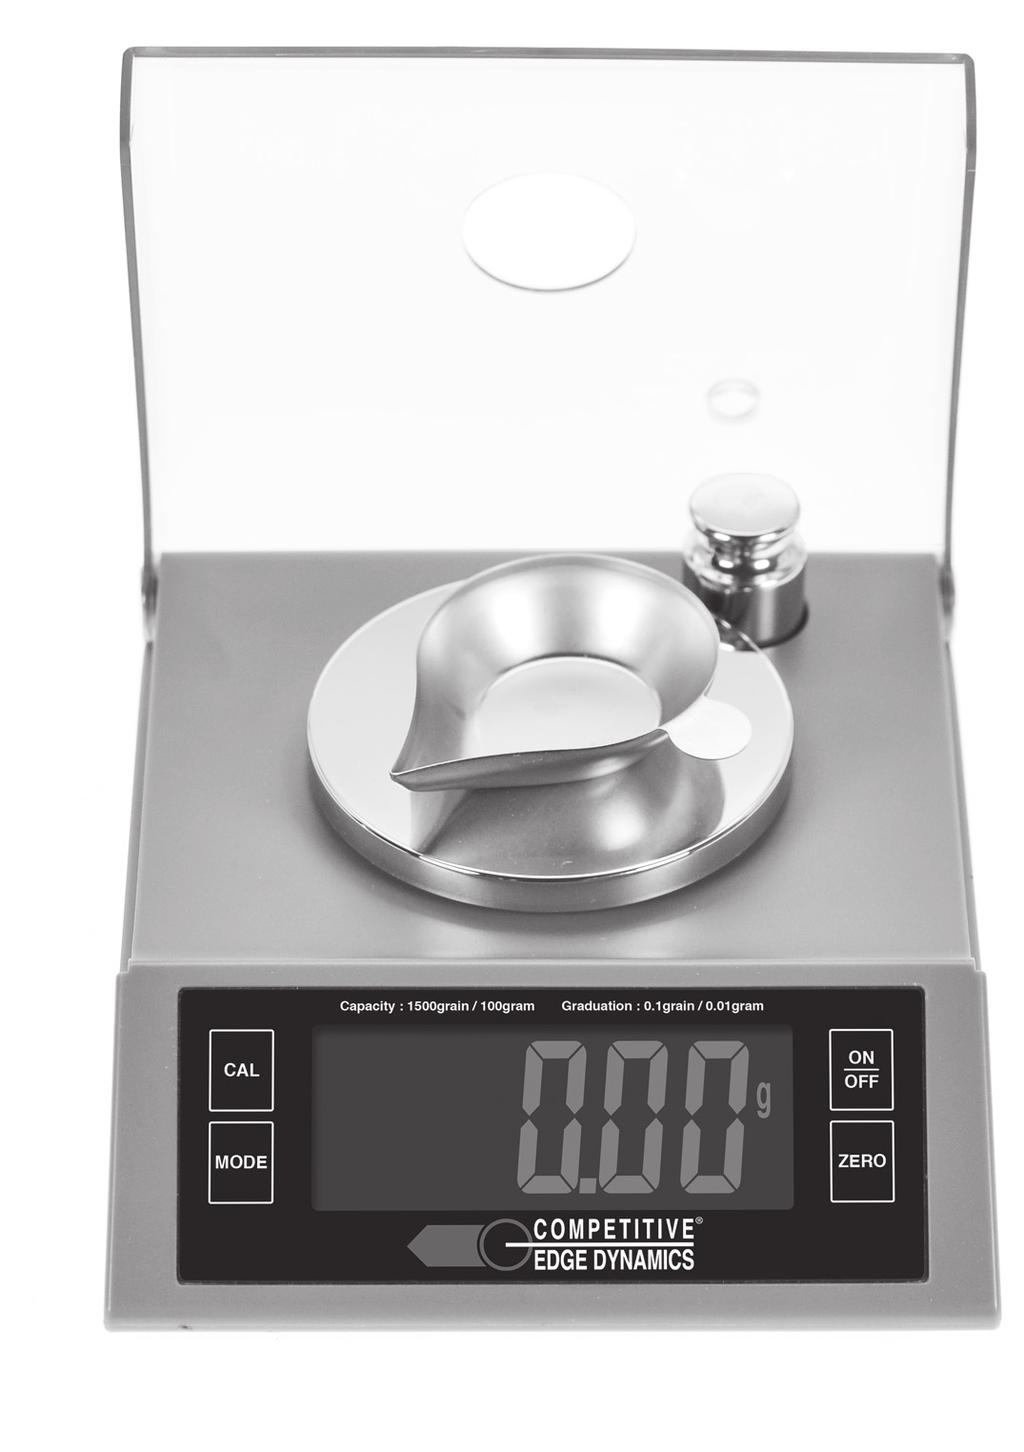 F. Re- Zero Function: Press the "ZERO" key at any time to re-zero the scale. This is a good idea if it is moved during a weighing process. FIG 11 FIG 11 G. Operation of the Scale (weighing powder): 1.